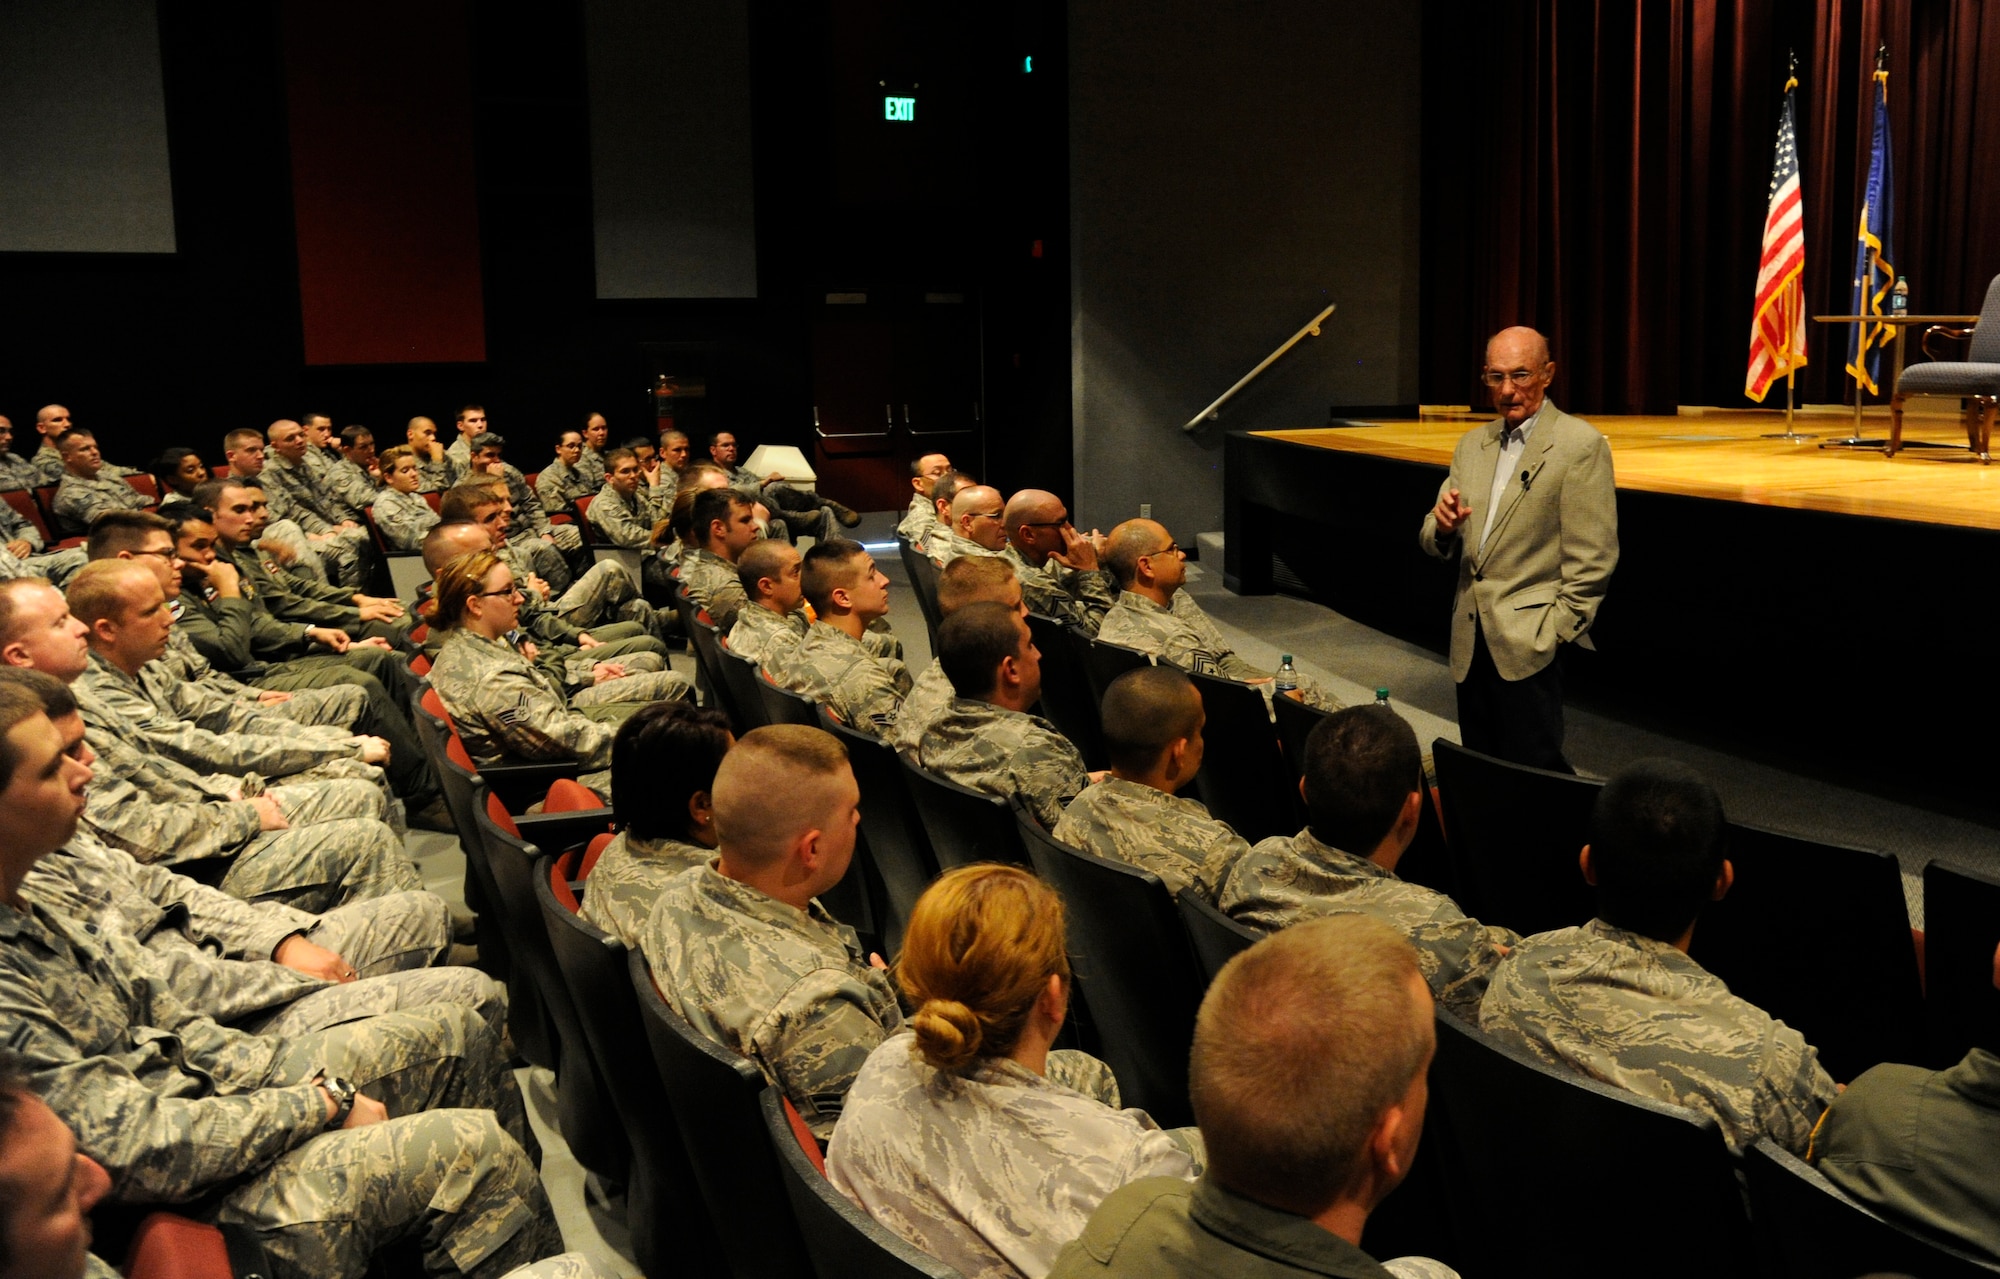 Retired Chief Master Sergeant of the Air Force James McCoy speaks during the enlisted all-call in the base theatre at Fairchild Air Force Base, Wash., July 27, 2012. McCoy retired from active duty in November 1981 with more than 30 years of service. He still tours the country speaking with Airmen of all ranks offering helpful and insightful advice. (U.S. Air Force photo by Airman 1st Class Ryan Zeski)